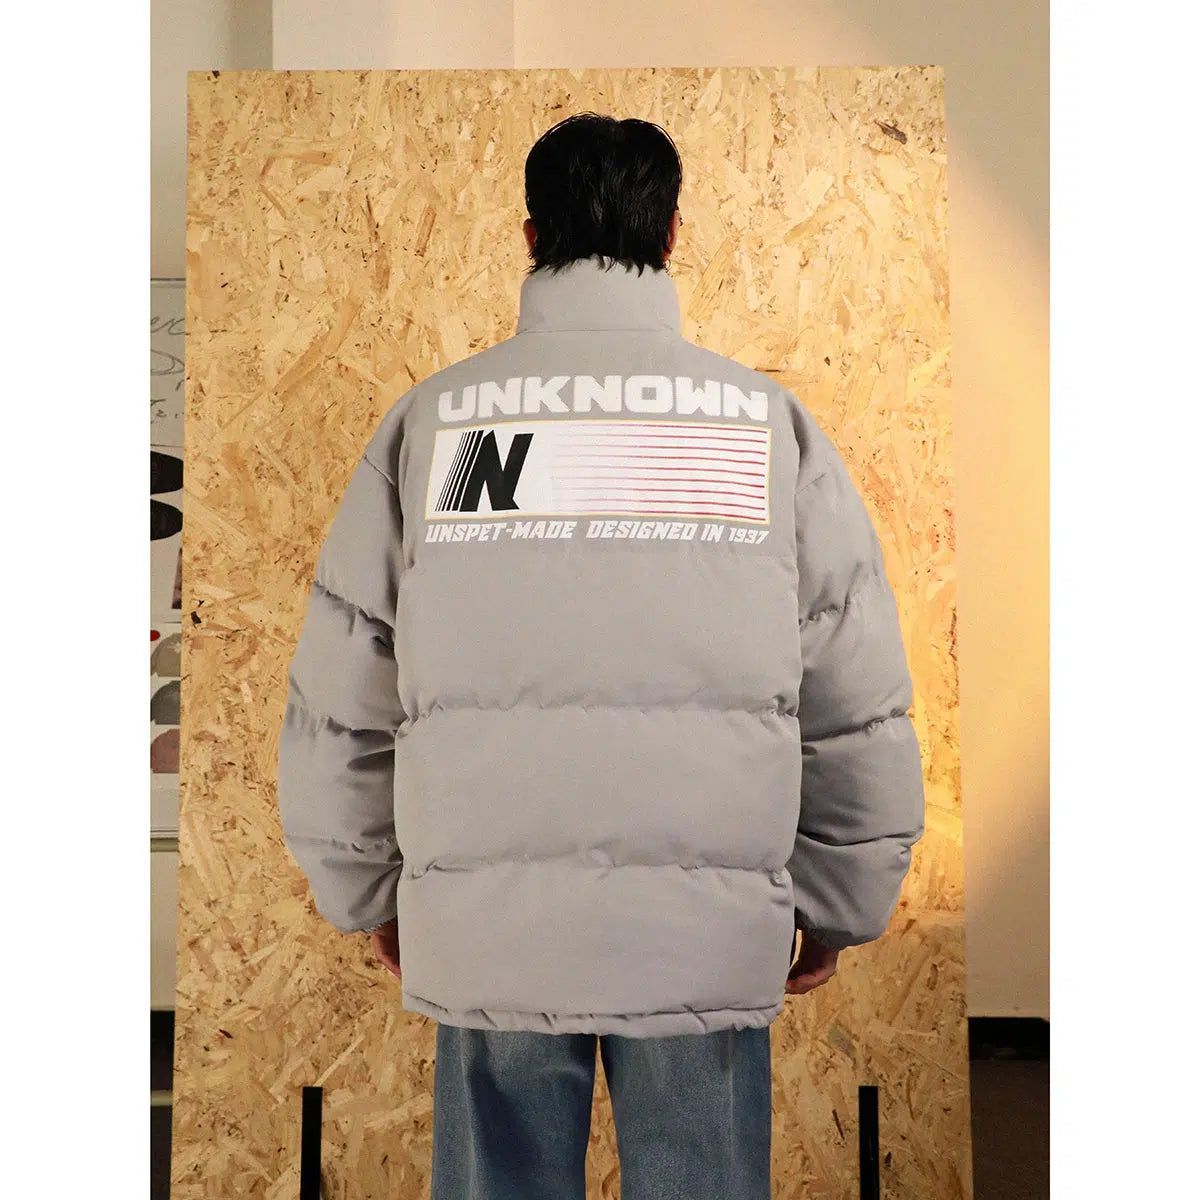 Logo Print Puffer Jacket Korean Street Fashion Jacket By Mr Nearly Shop Online at OH Vault